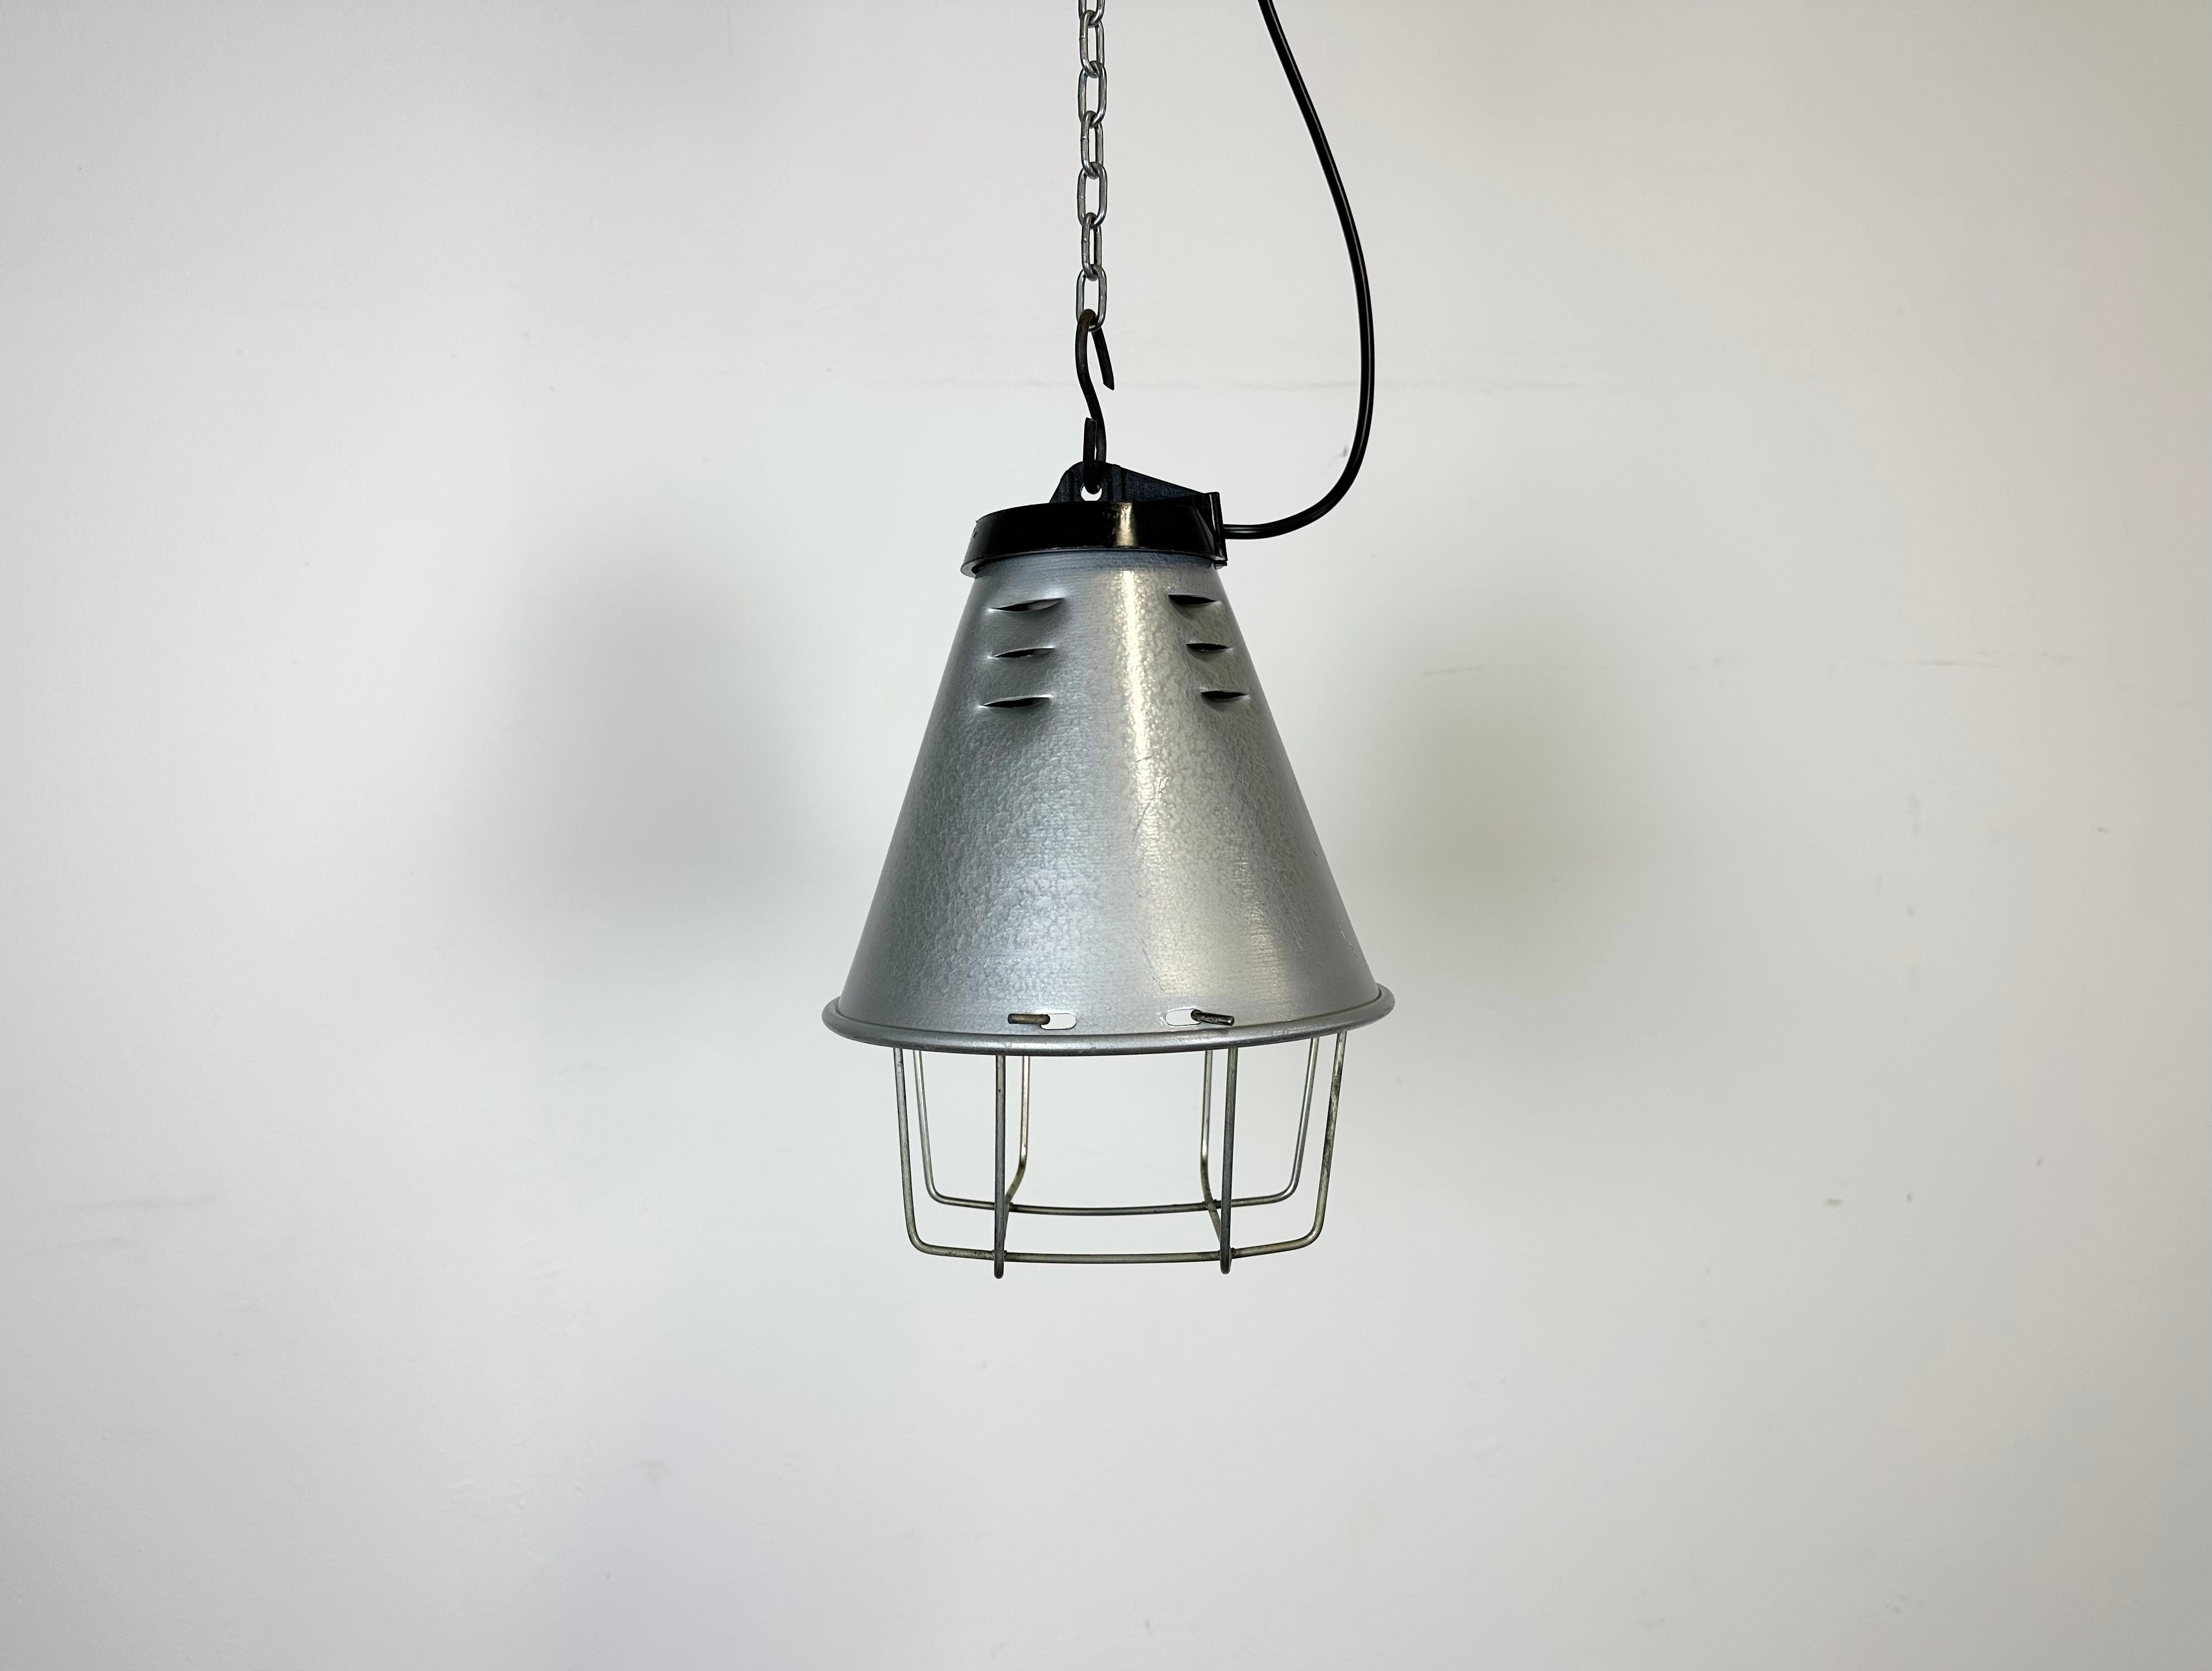 Industrial factory hanging lamp made by Polam Wilkasy in Poland during the 1970s. It features a grey hammerpaint aluminium shade, a black bakelite top and an iron grid. The original porcelain socket requires standard E 27/ E 26 lightbulbs. New wire.